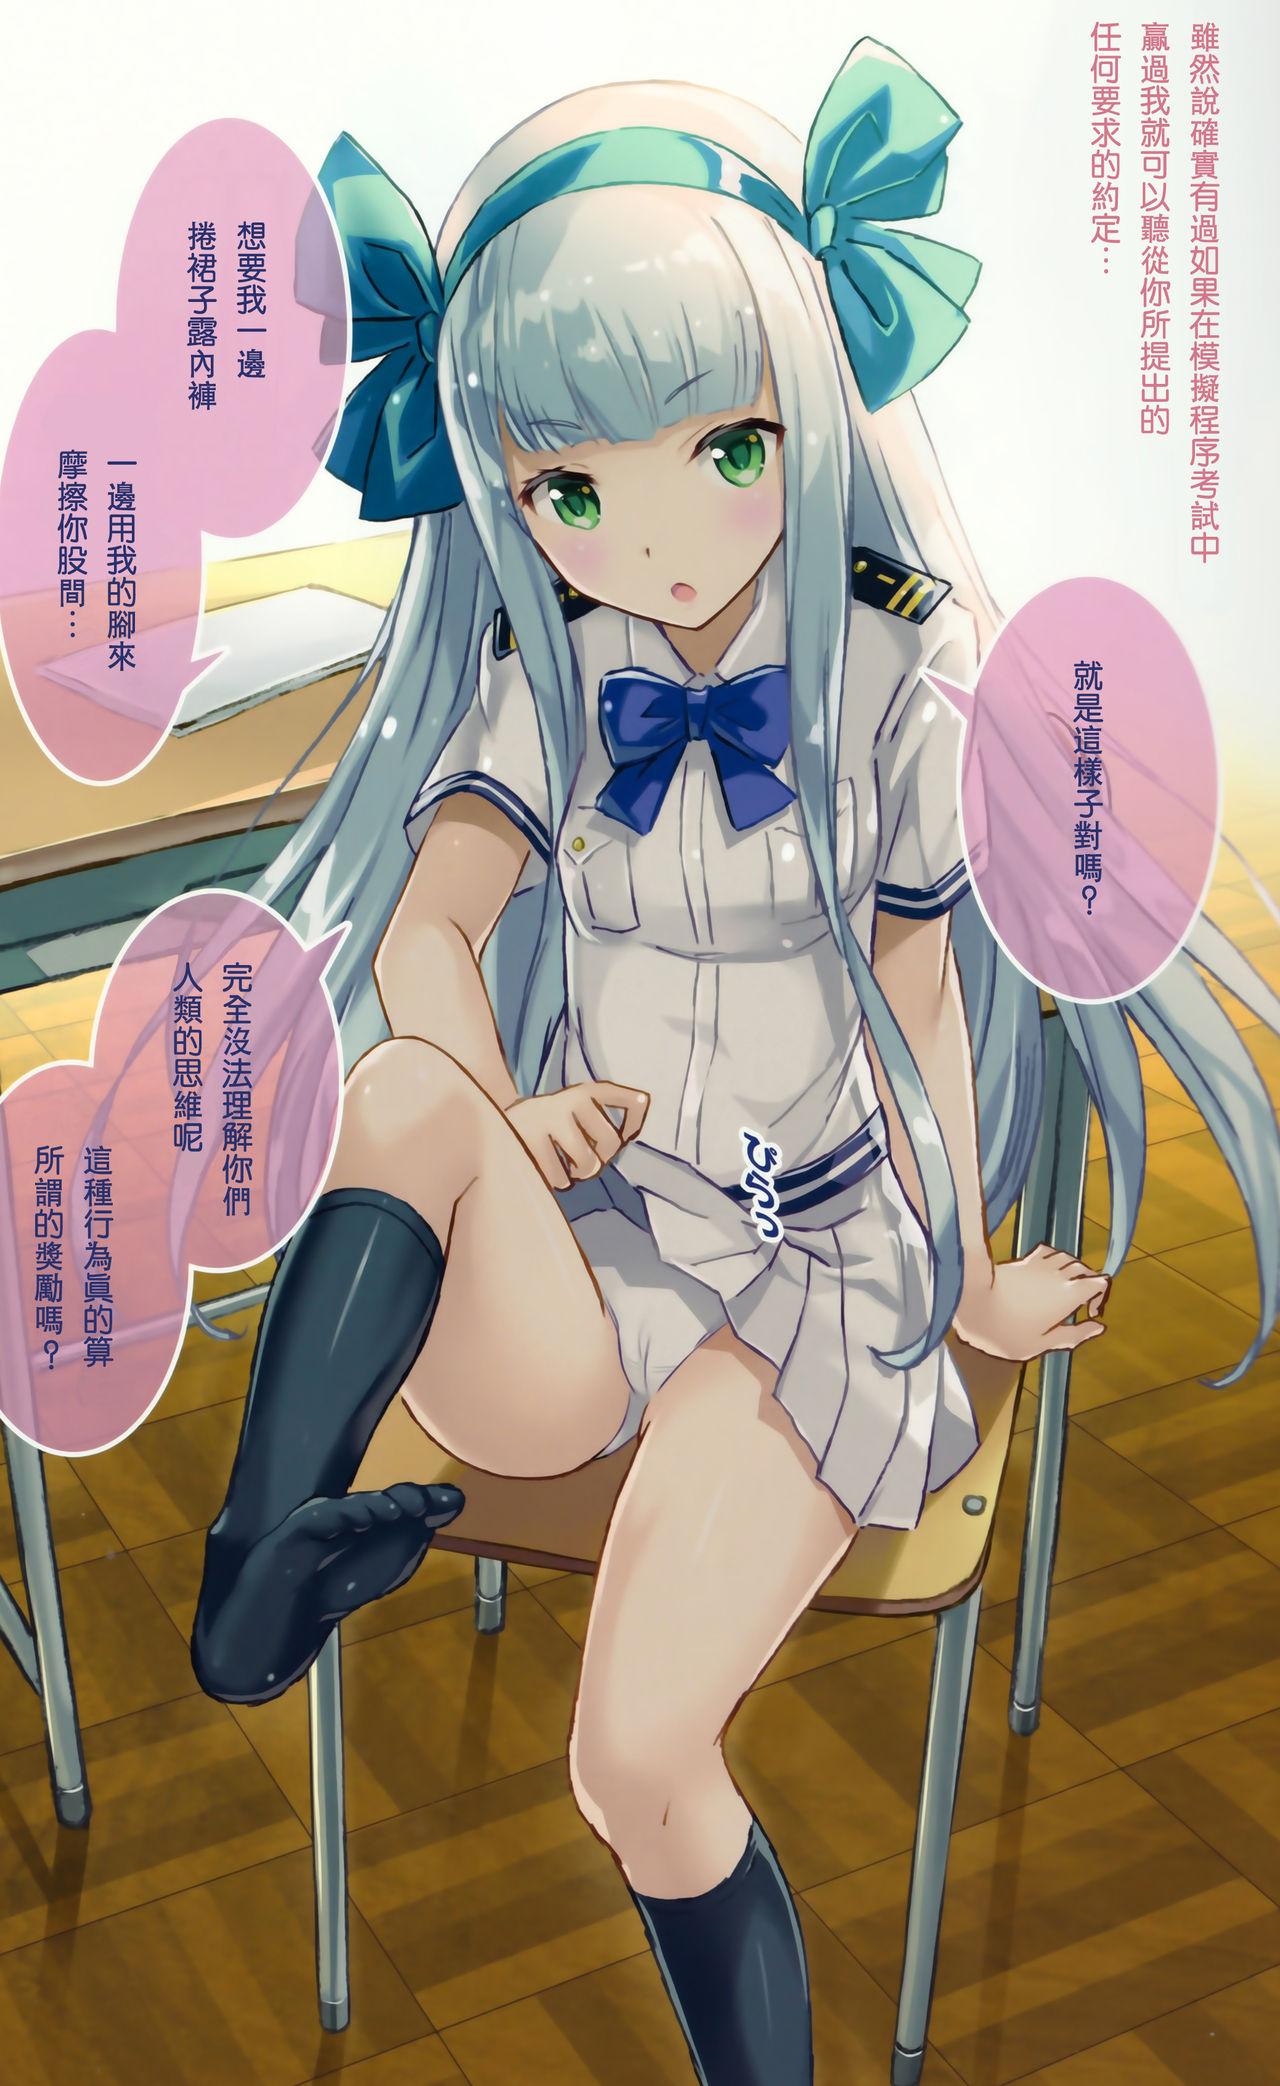 Perfect Ass TAKAO OF BLUE STEEL 06 - Arpeggio of blue steel Love - Page 7